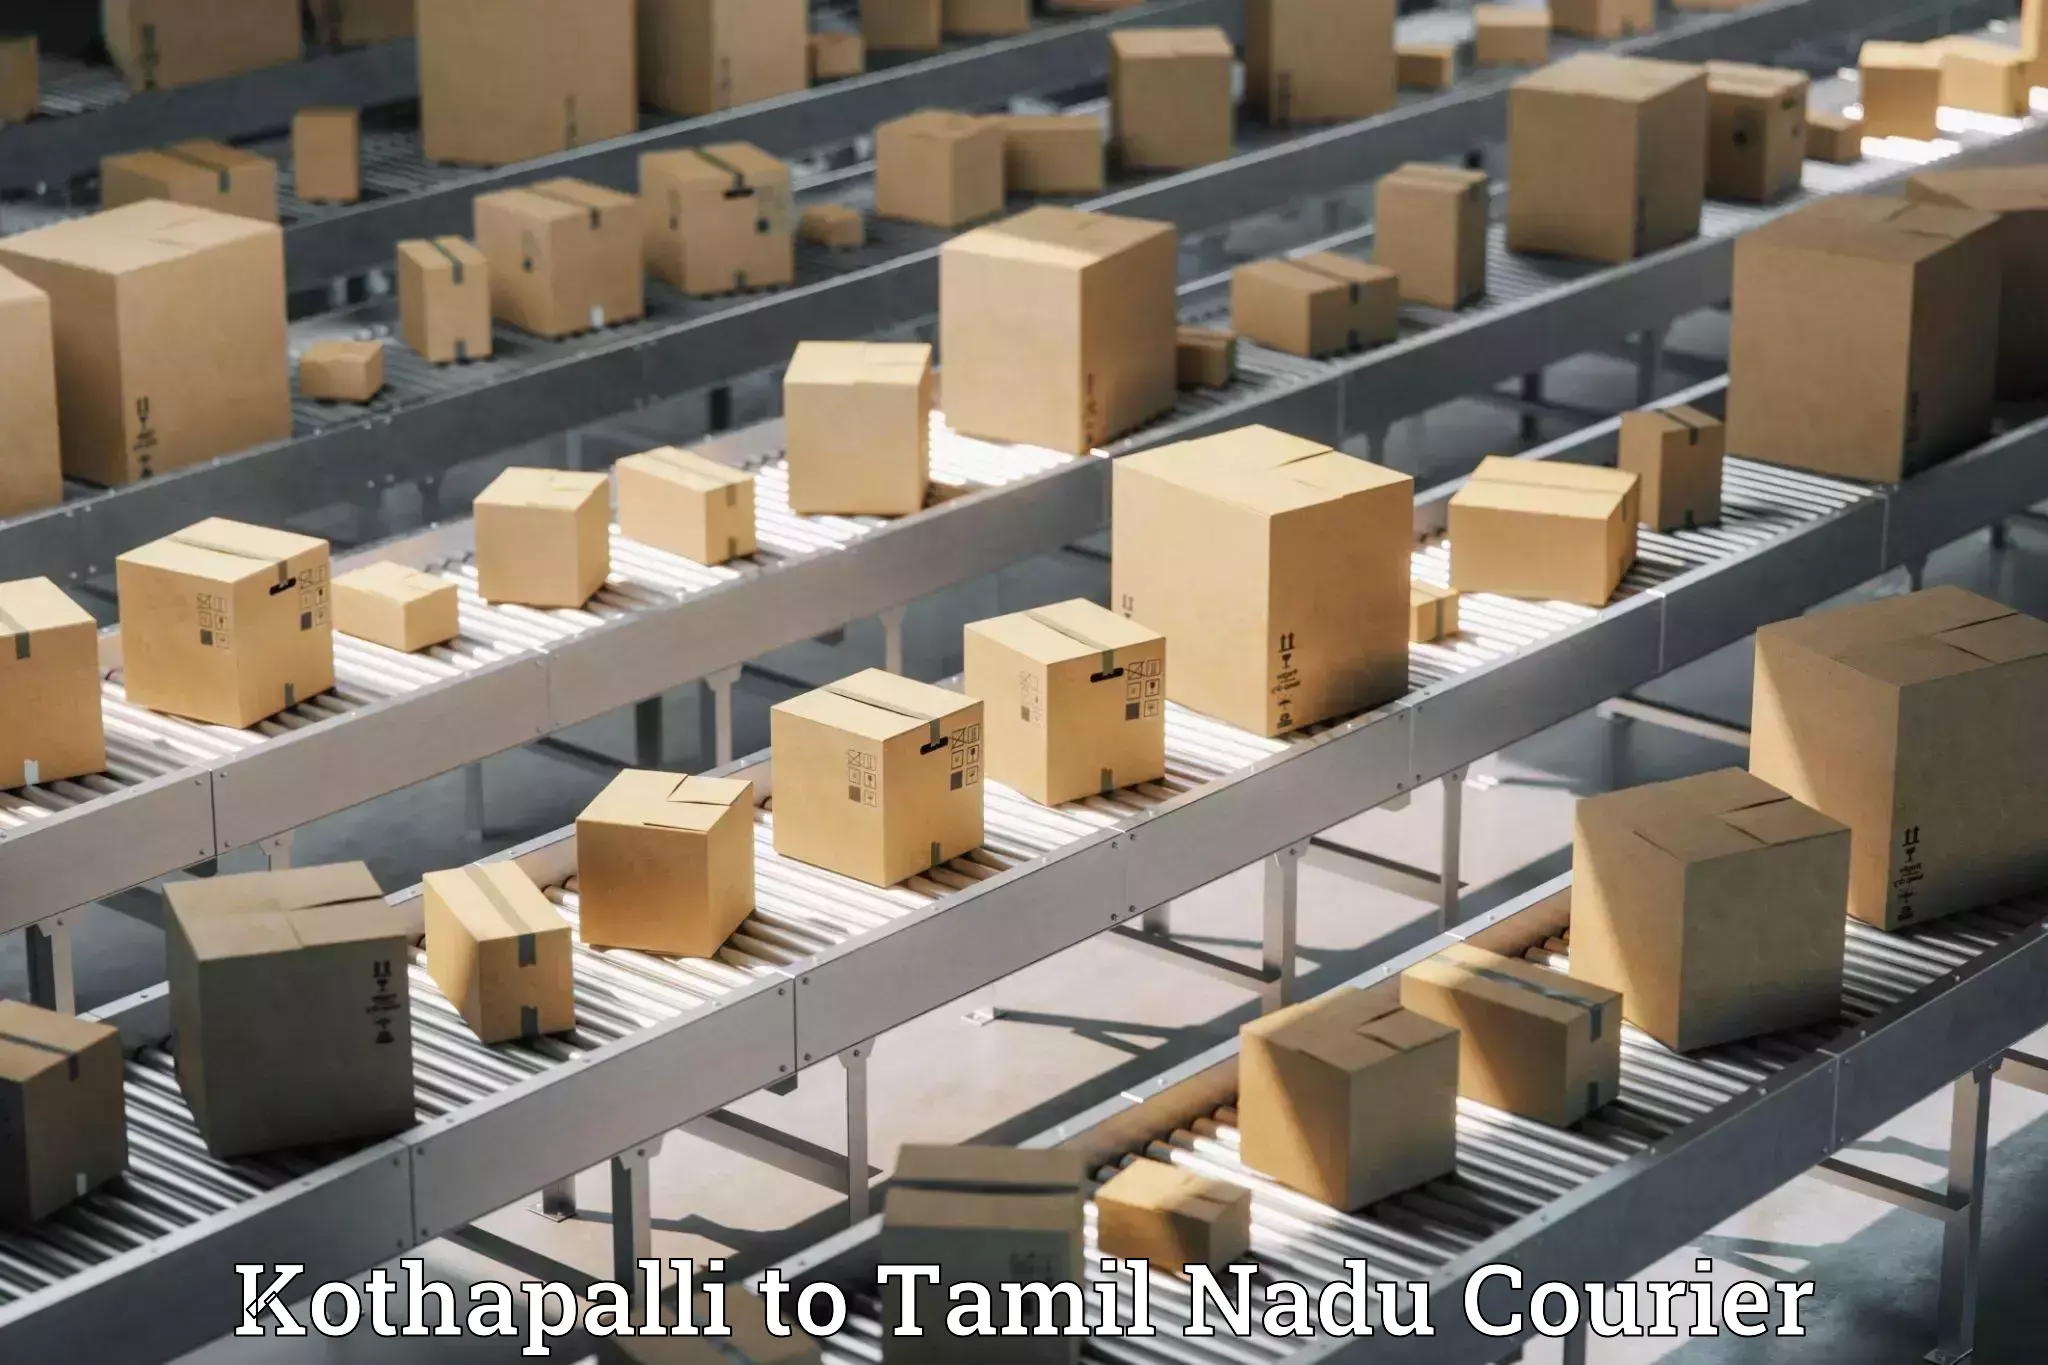 Quality courier services Kothapalli to Chennai Port